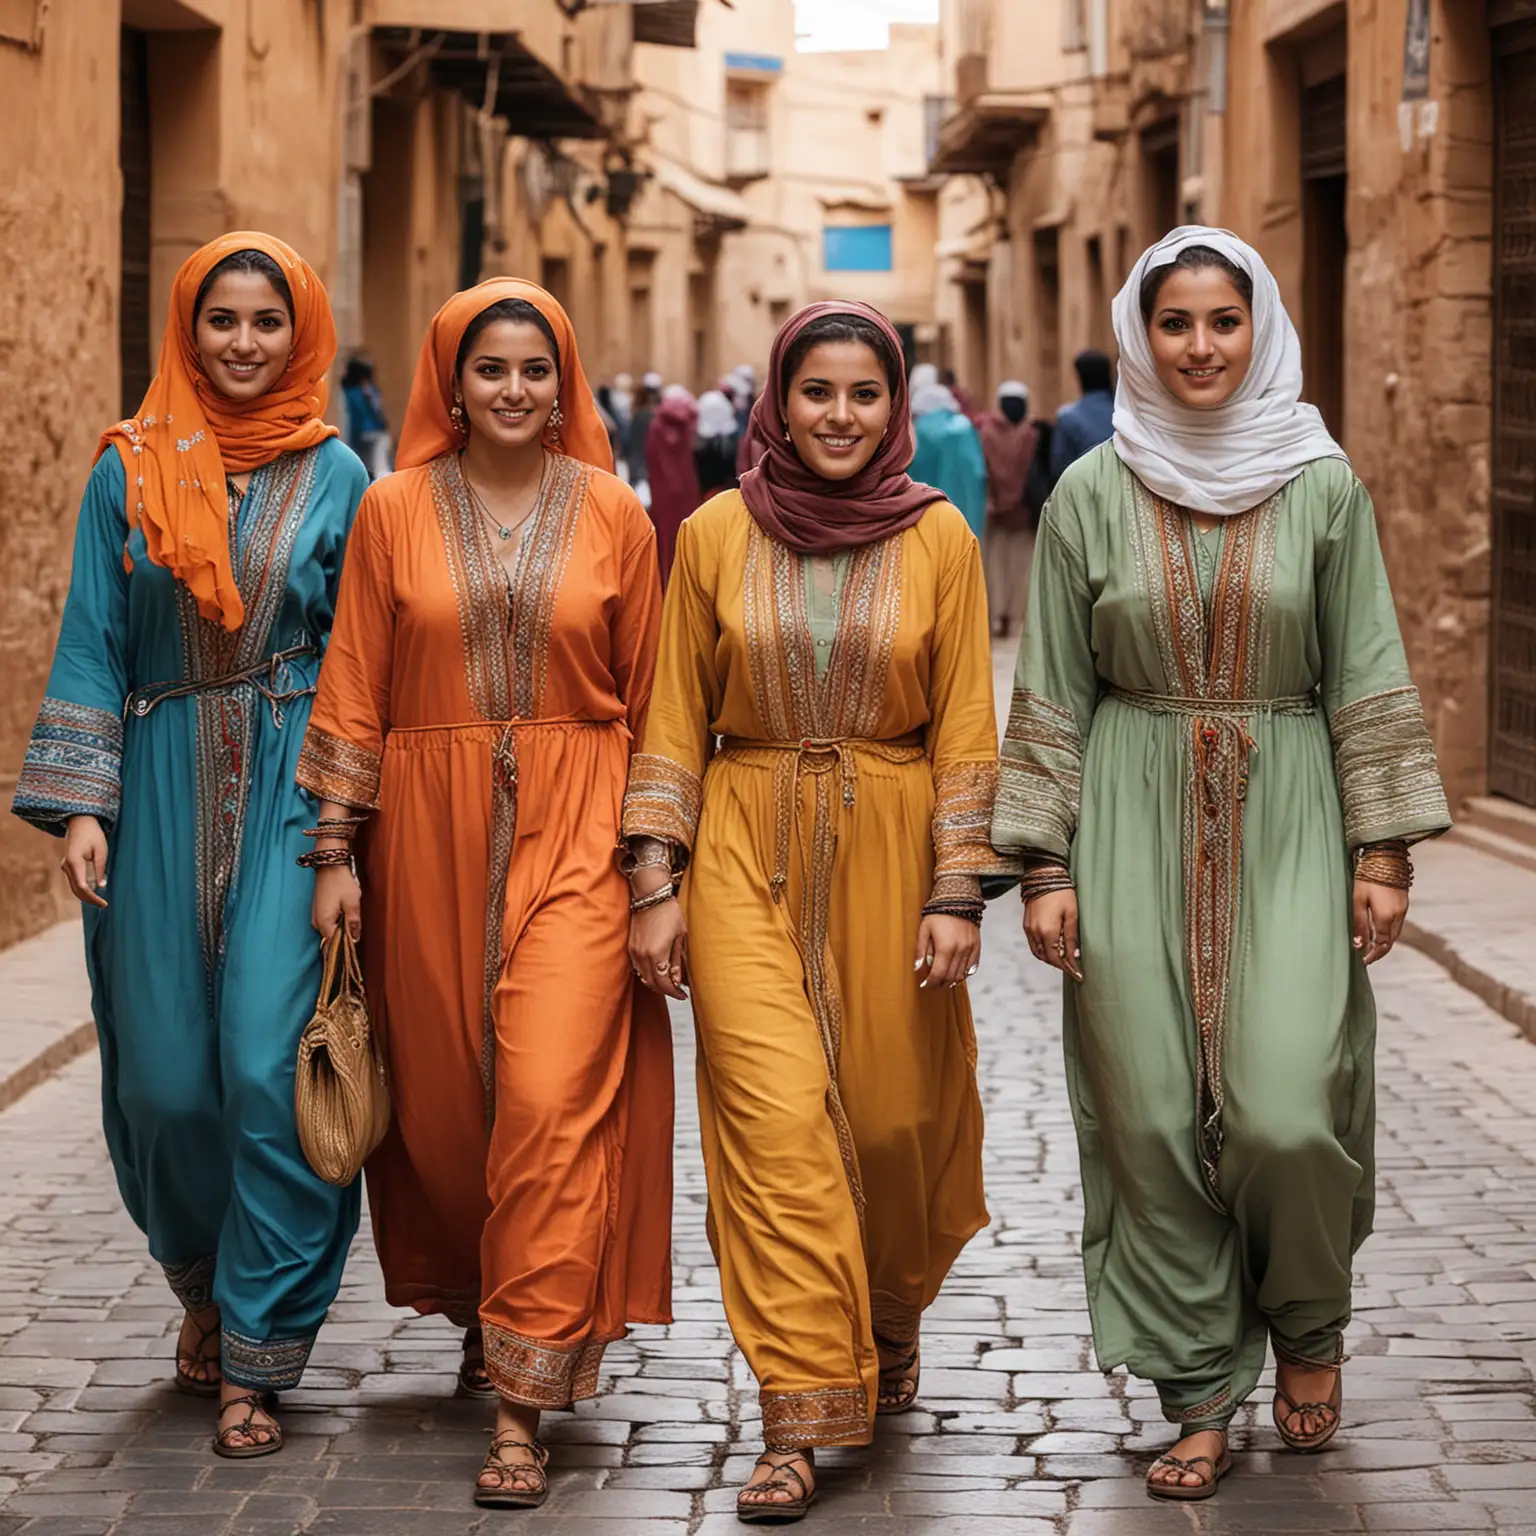 Moroccan Women in Traditional Street Clothes Exploring Vibrant Market Alleyways